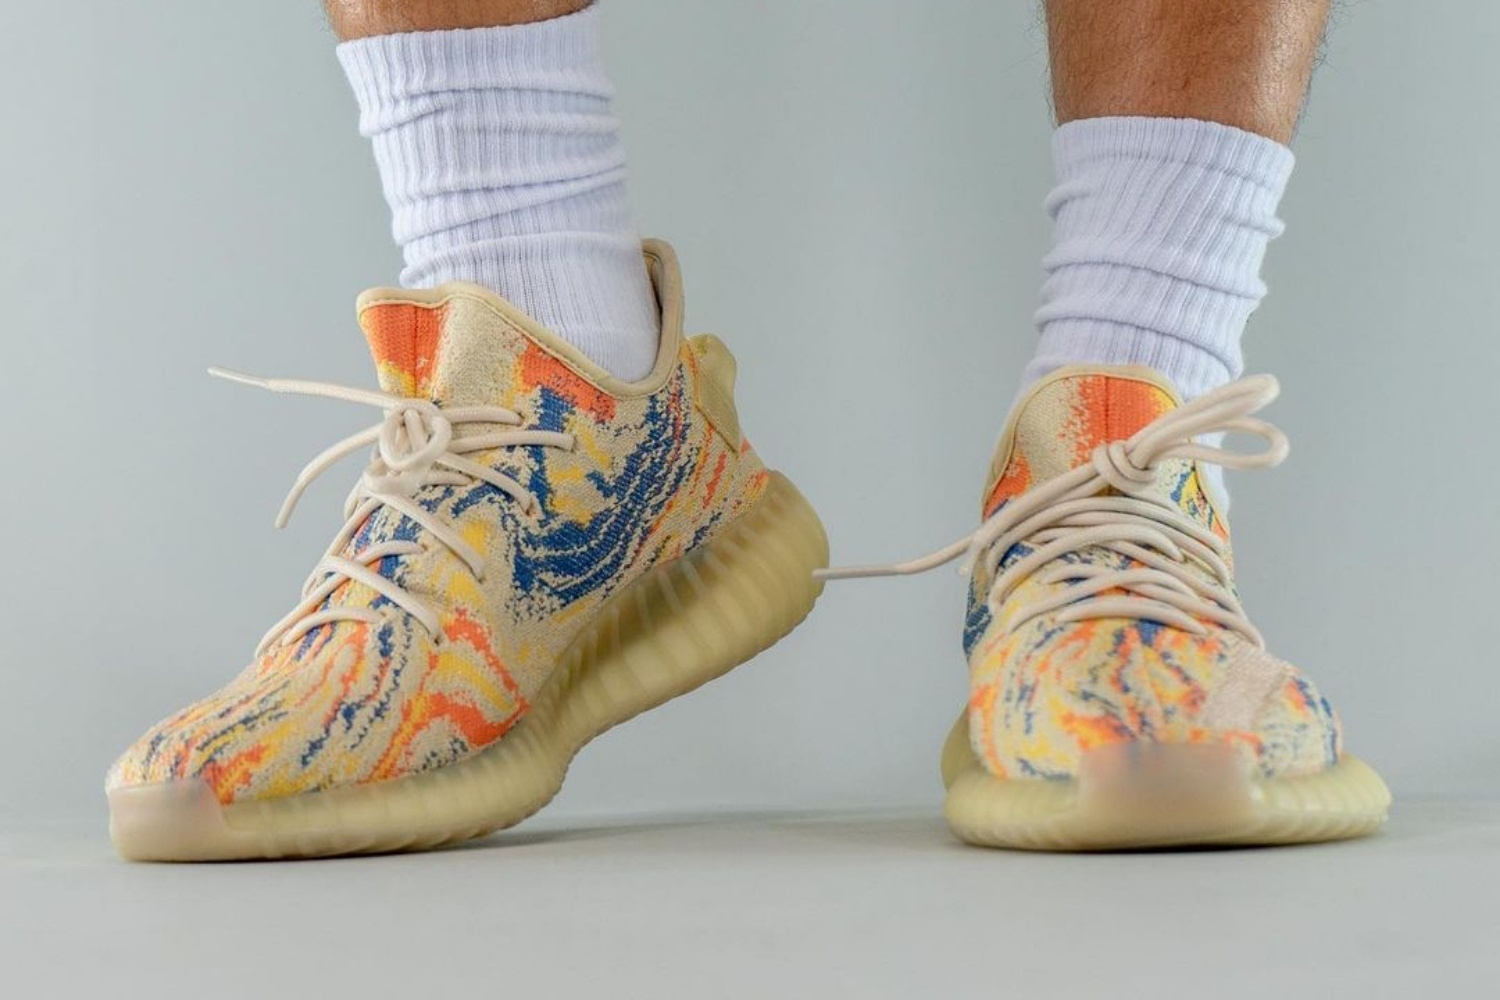 Where to cop: adidas Yeezy Boost 350 V2 ‘MX Oat’